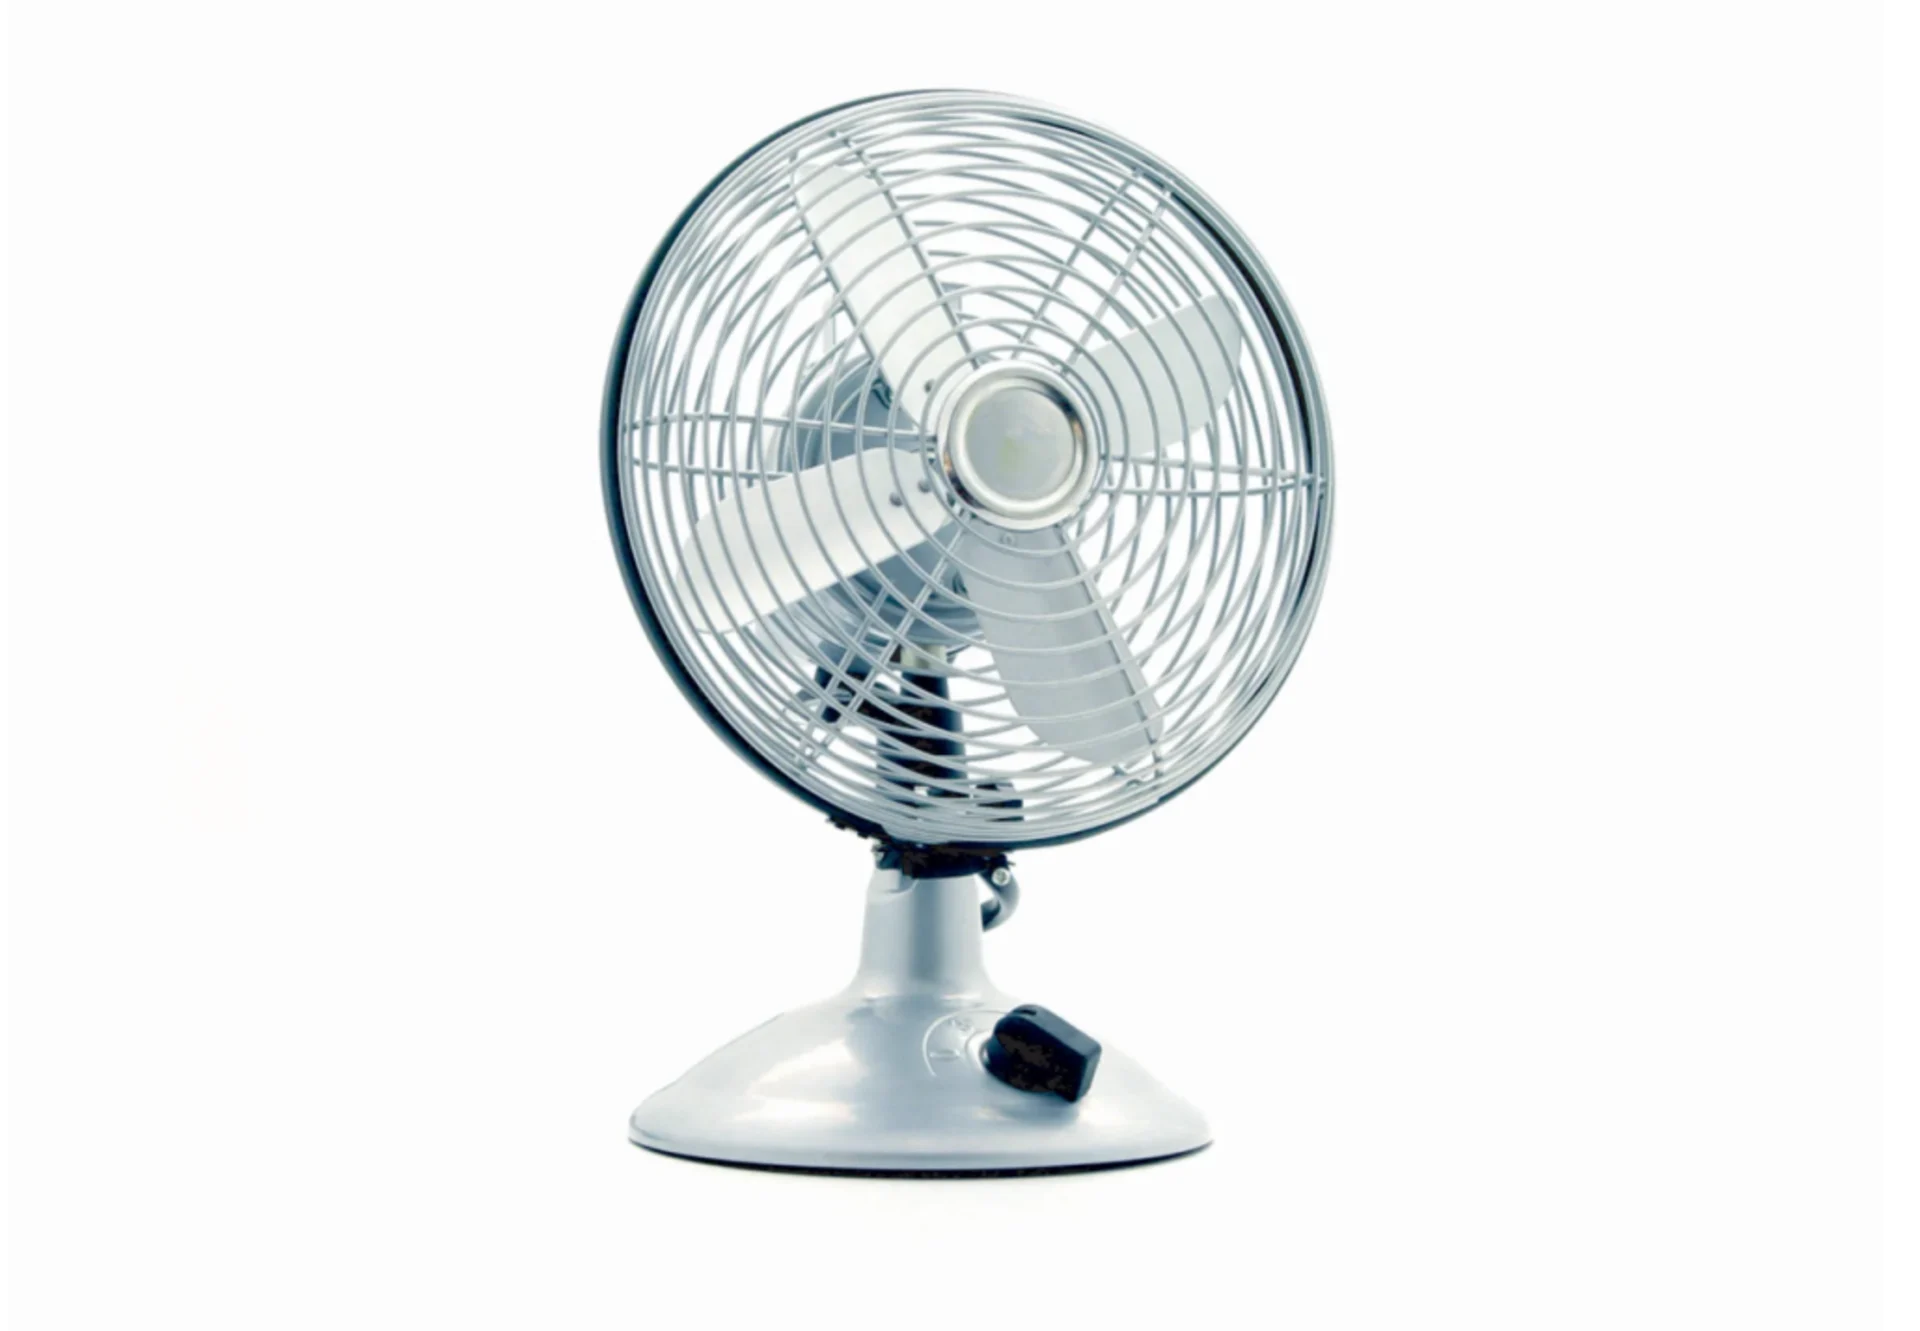 Beating the heat with a fan? It may not be as effective as you think